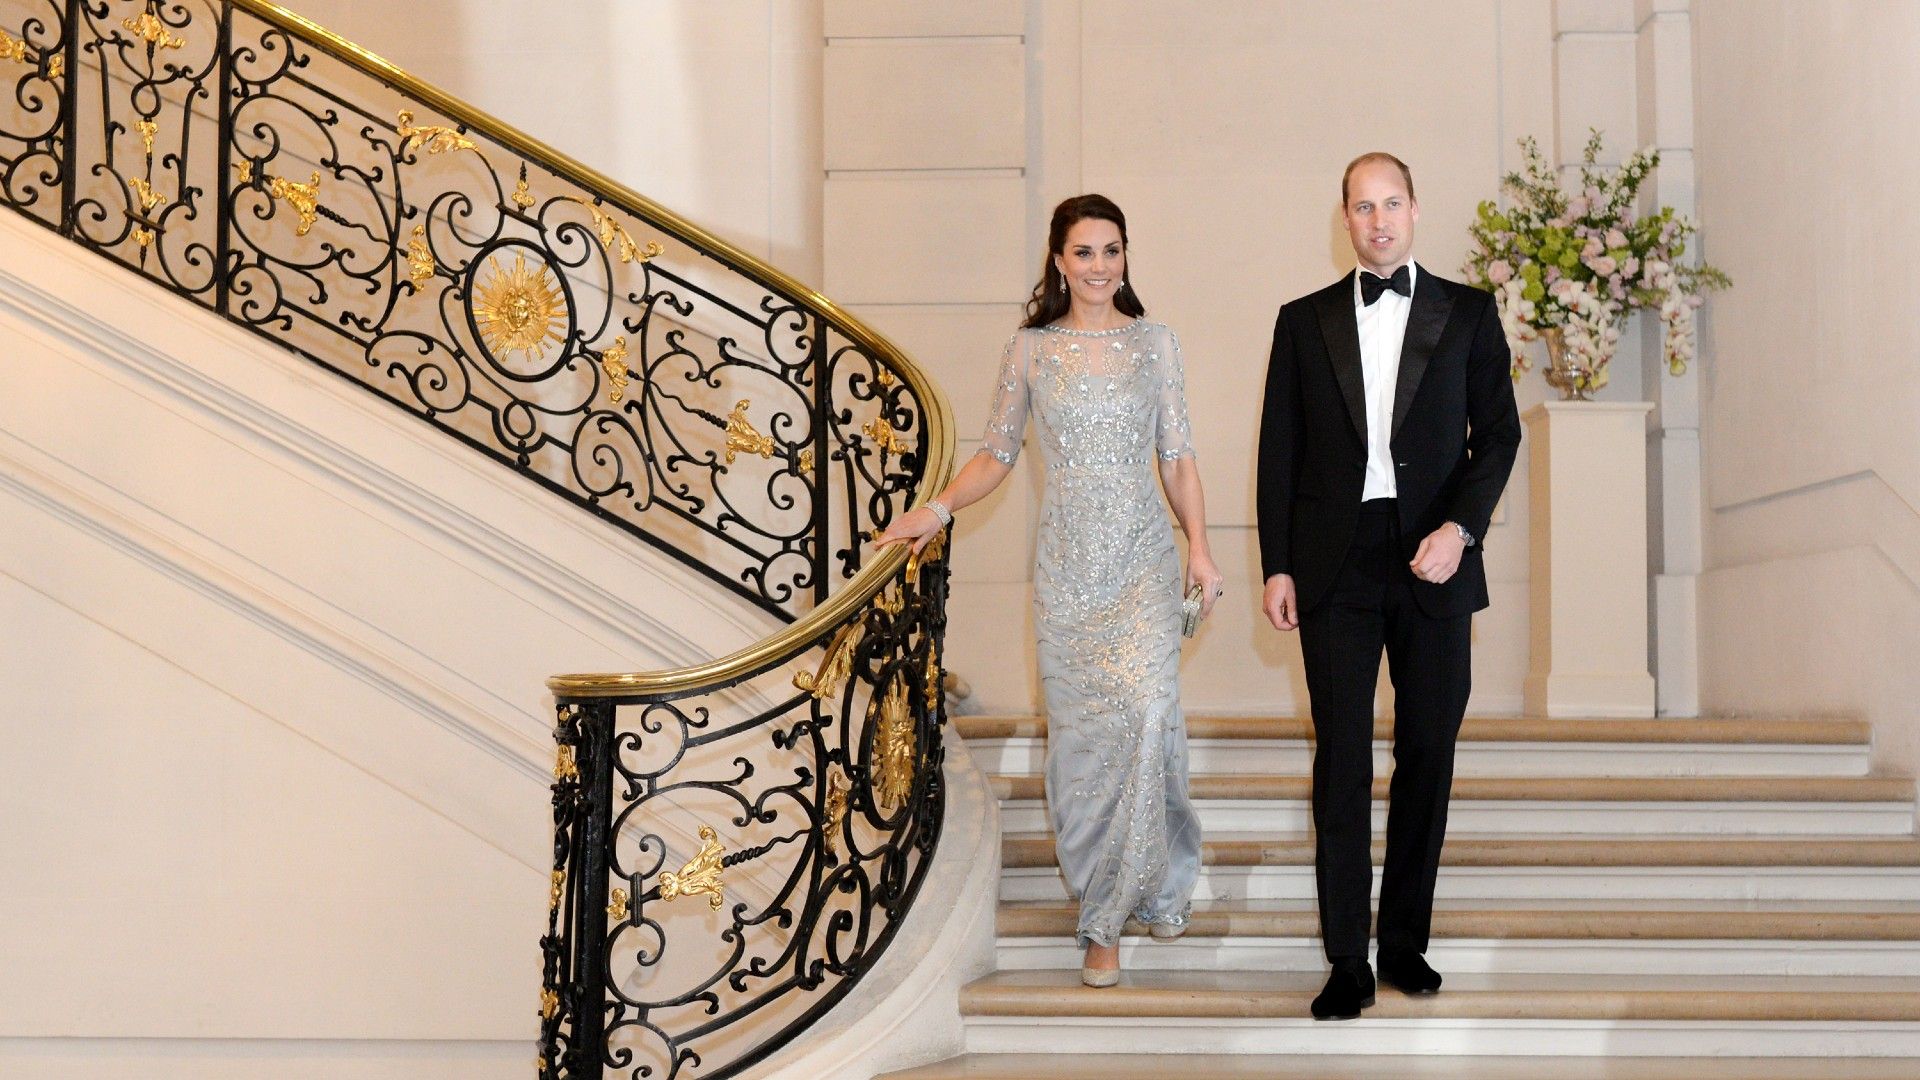 <p>                     Putting on a glamorous and united front, Prince William and Kate Middleton attended a dinner hosted by Her Majesty's Ambassador to France, Edward Llewellyn, at the British Embassy in Paris in 2017.                   </p>                                      <p>                     Poignantly, it was the prince’s first official visit to the French capital since his mother died there in 1997.                   </p>                                      <p>                     William looked powerful and suave in a classic tuxedo, while Kate positively glistened beside him in a twinkly, pale blue Jenny Packham gown.                   </p>